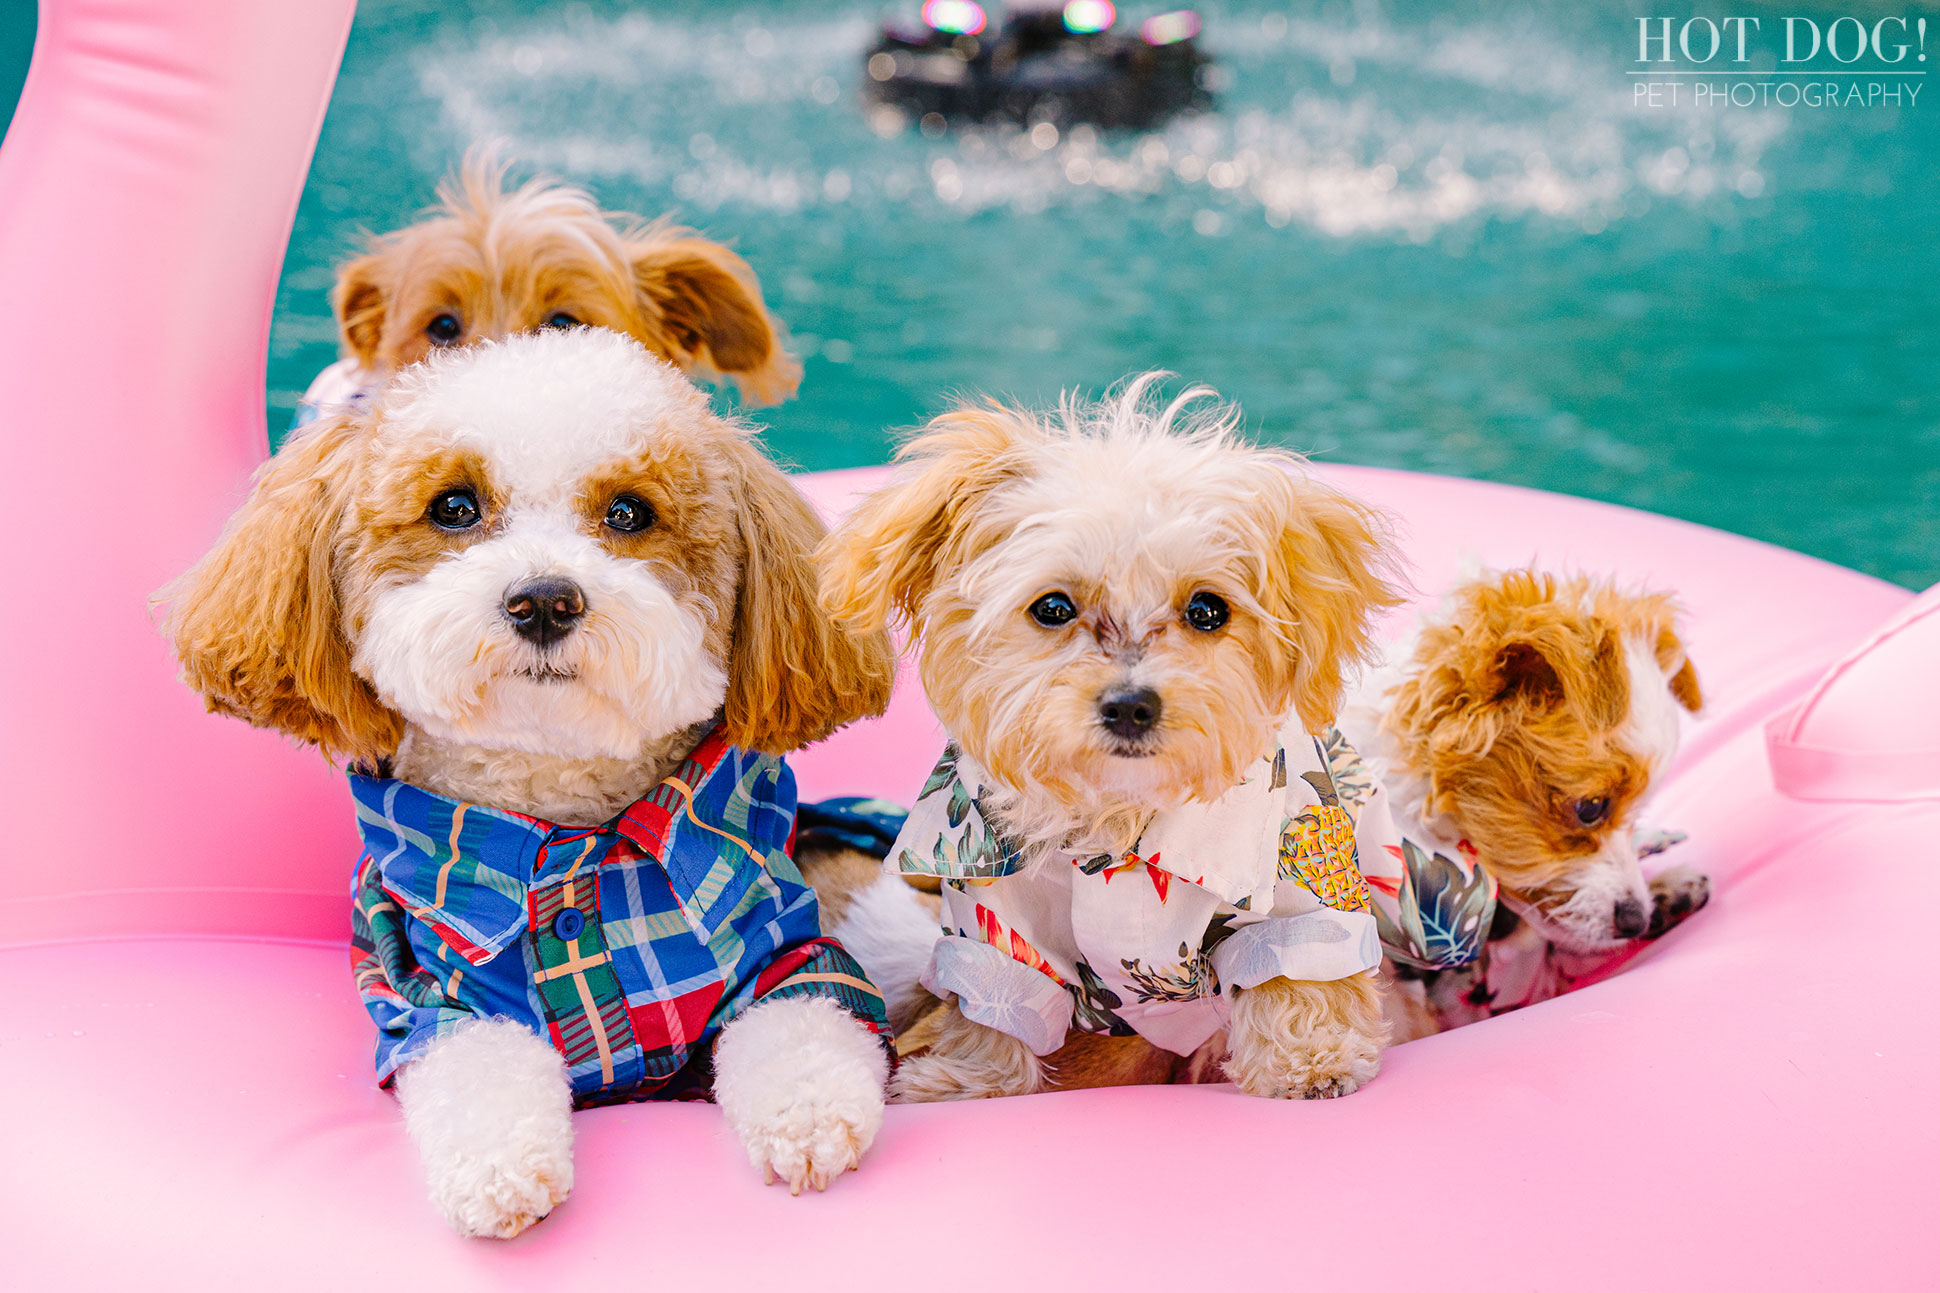 A professional pet photo session with Hot Dog! Pet Photography featuring adorable Malchipoo puppies.